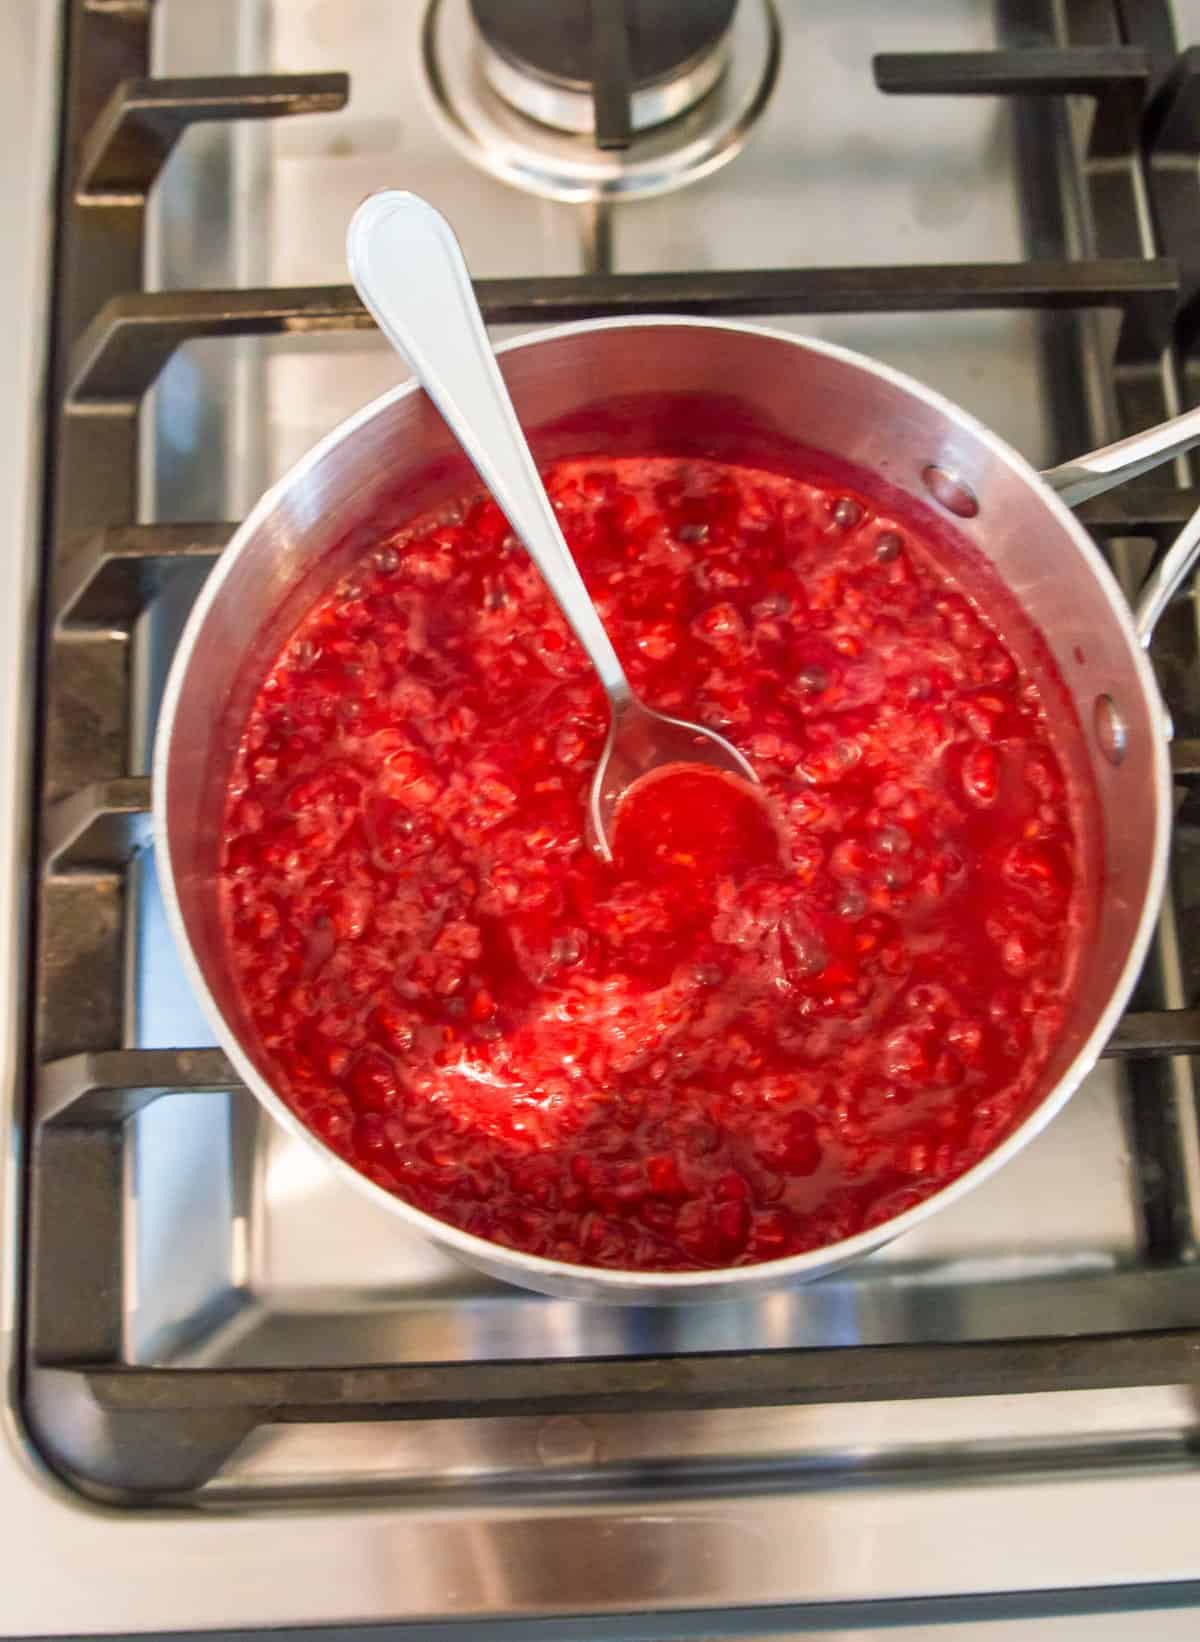 A pot of raspberries simmering on the stovetop with a spoon in it.